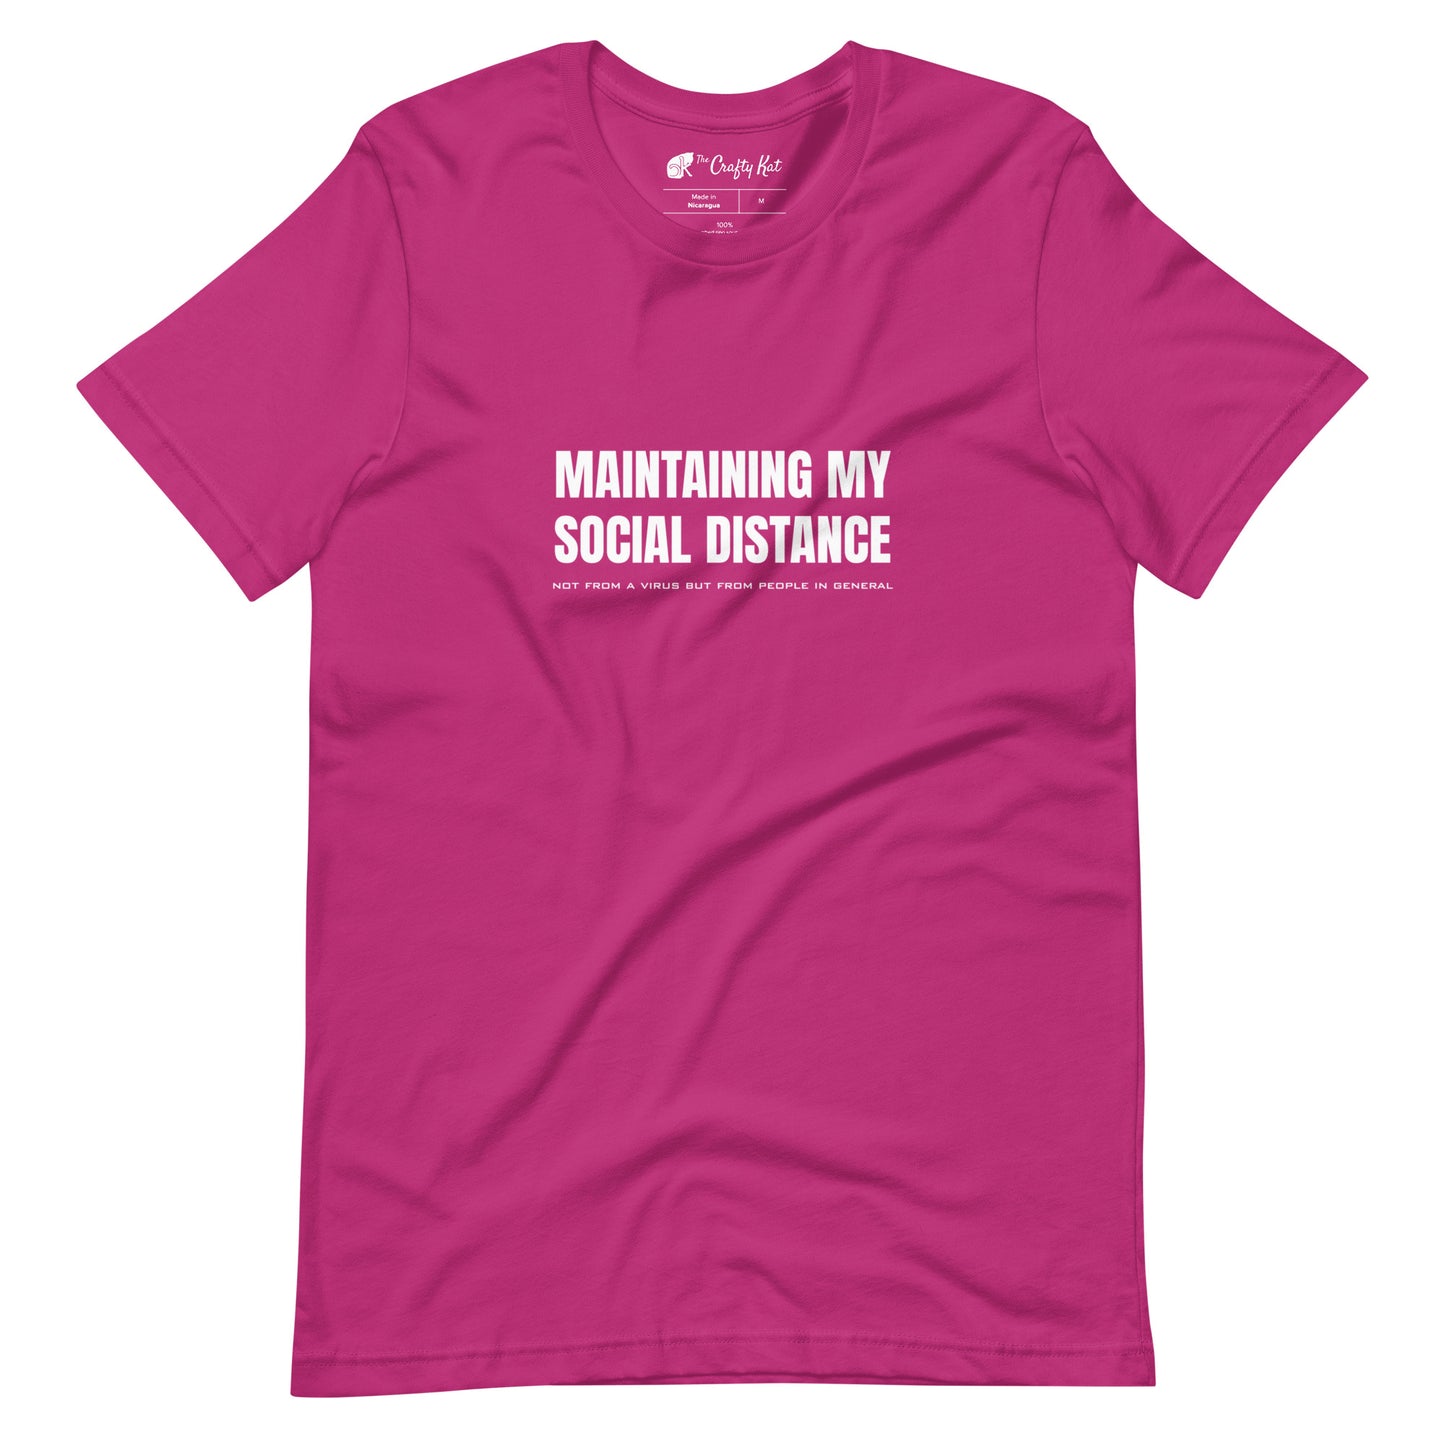 Berry (hot pink) t-shirt with white graphic: "MAINTAINING MY SOCIAL DISTANCE not from a virus but from people in general"